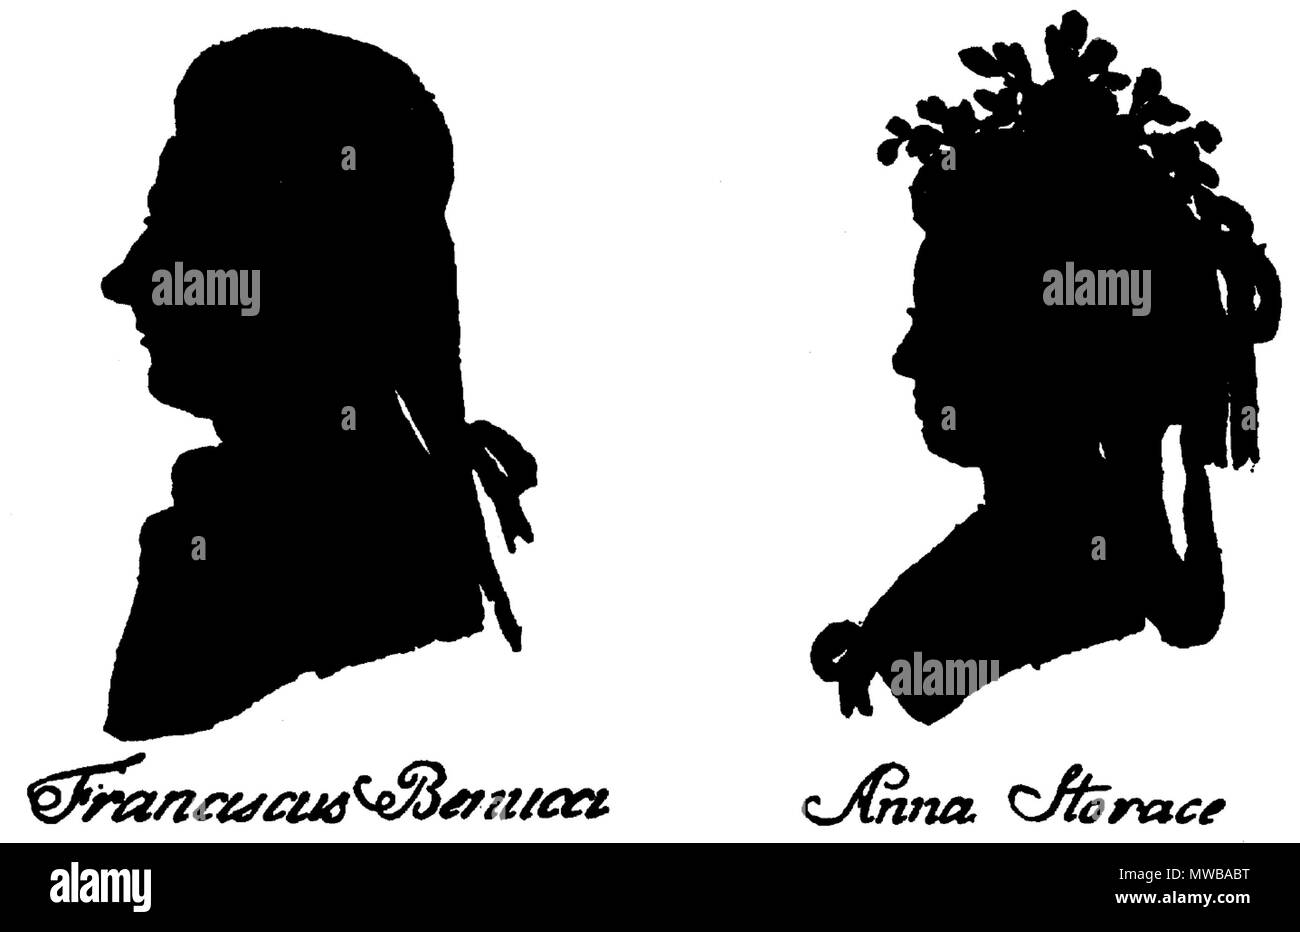 . English: Silhoutte of the 18th century singers Francesco Benucci and Anna Storace by Hieronymous Loeschenkohl. Appeared originally in Oesterreichisches National Taschenkalender, Vienna 1786-1787. Source for attribution: Daniel Heartz (1992), Mozart's Operas, University of California Press, p. viii . 29 March 2012. Hieronymous Loeschenkohl 215 FrancescoBenucciAndAnnaStoraceSilhouette Stock Photo